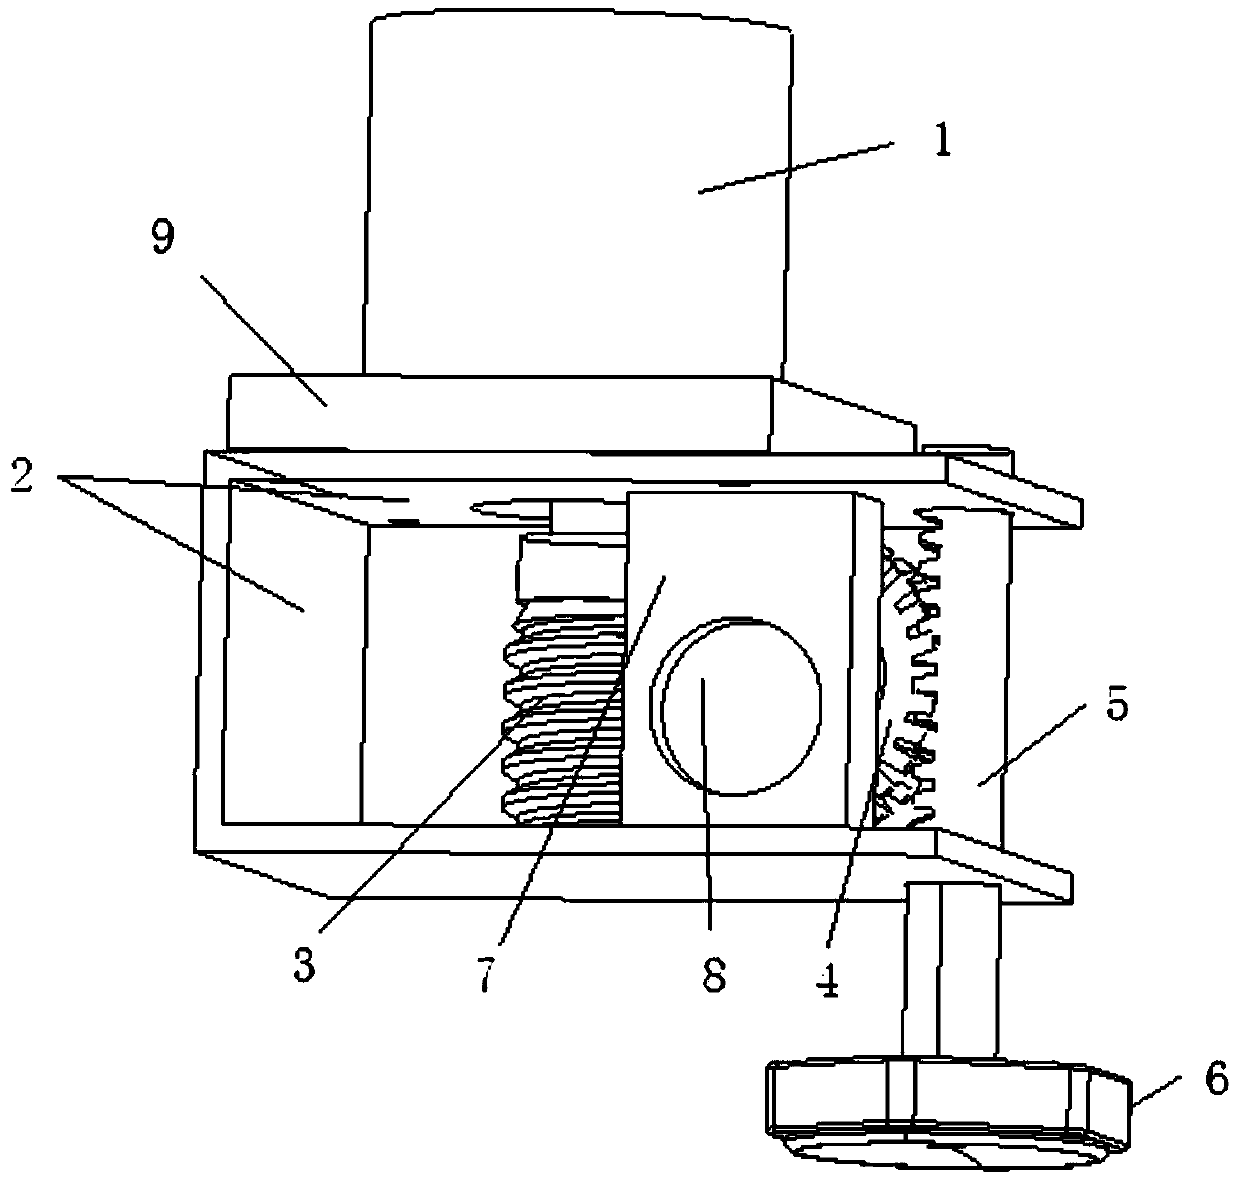 An electrical appliance with self-leveling feet and a leveling method